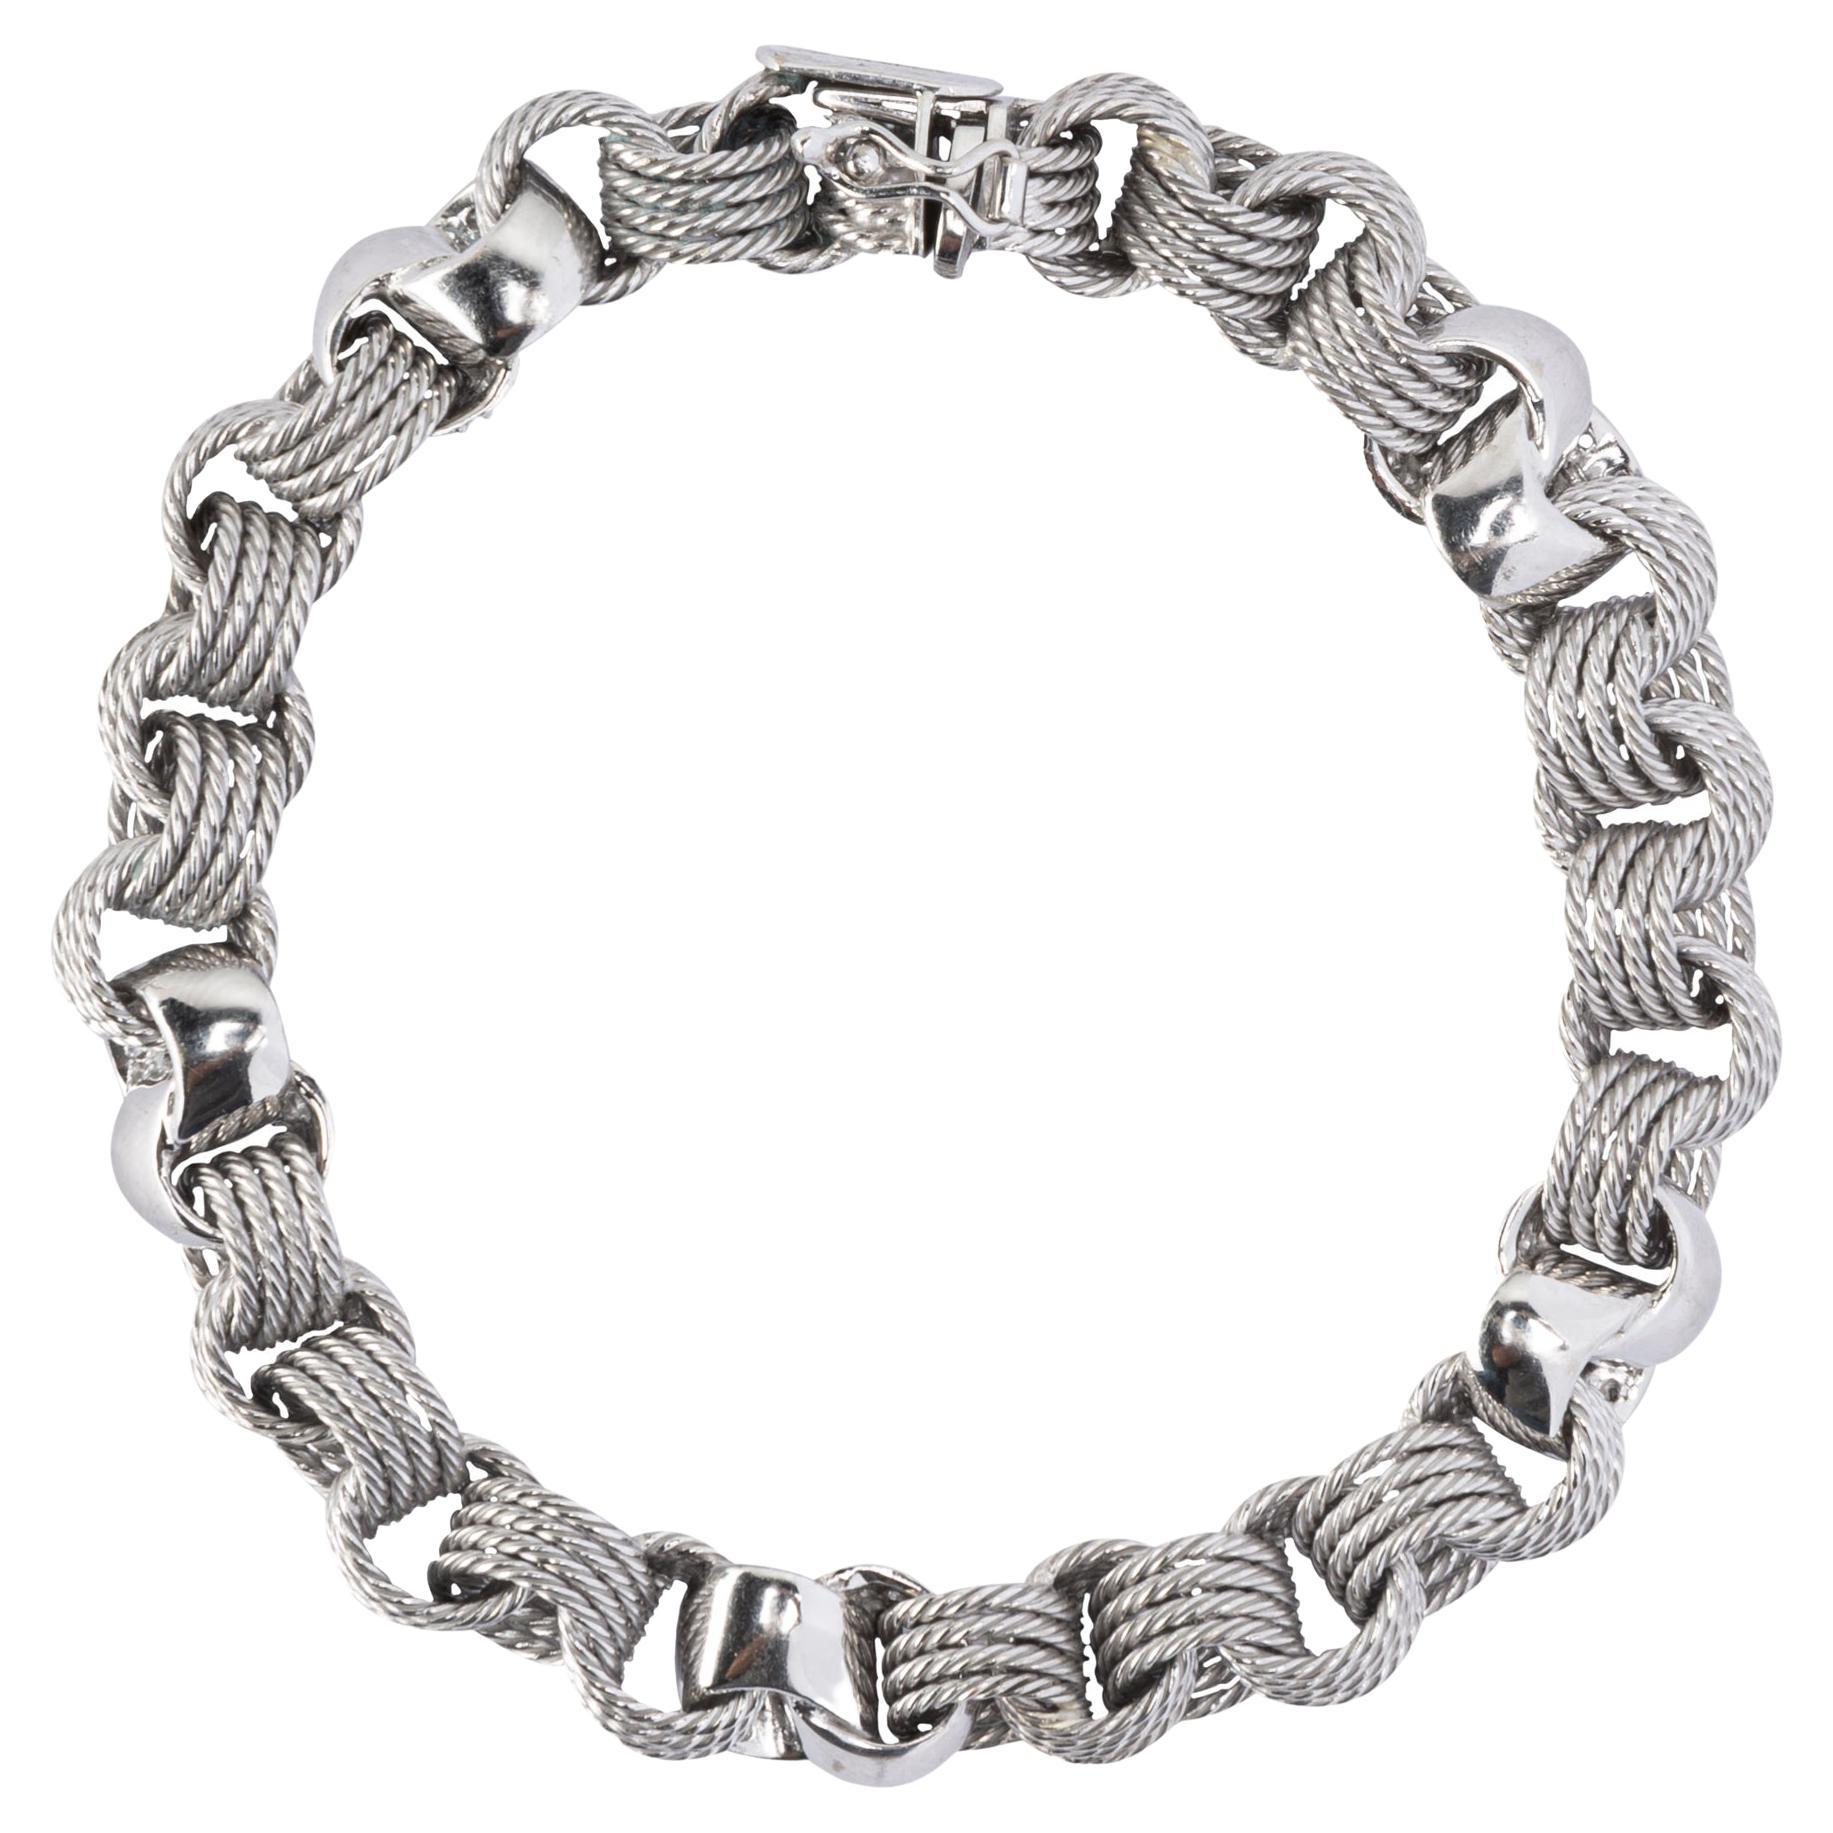 Alex Jona design collection, hand crafted in Italy, 18 karat white gold bracelet with 5 links set with 0.90 carats of white diamonds, G color, VS clarity.

Alex Jona jewels stand out, not only for their special design and for the excellent quality